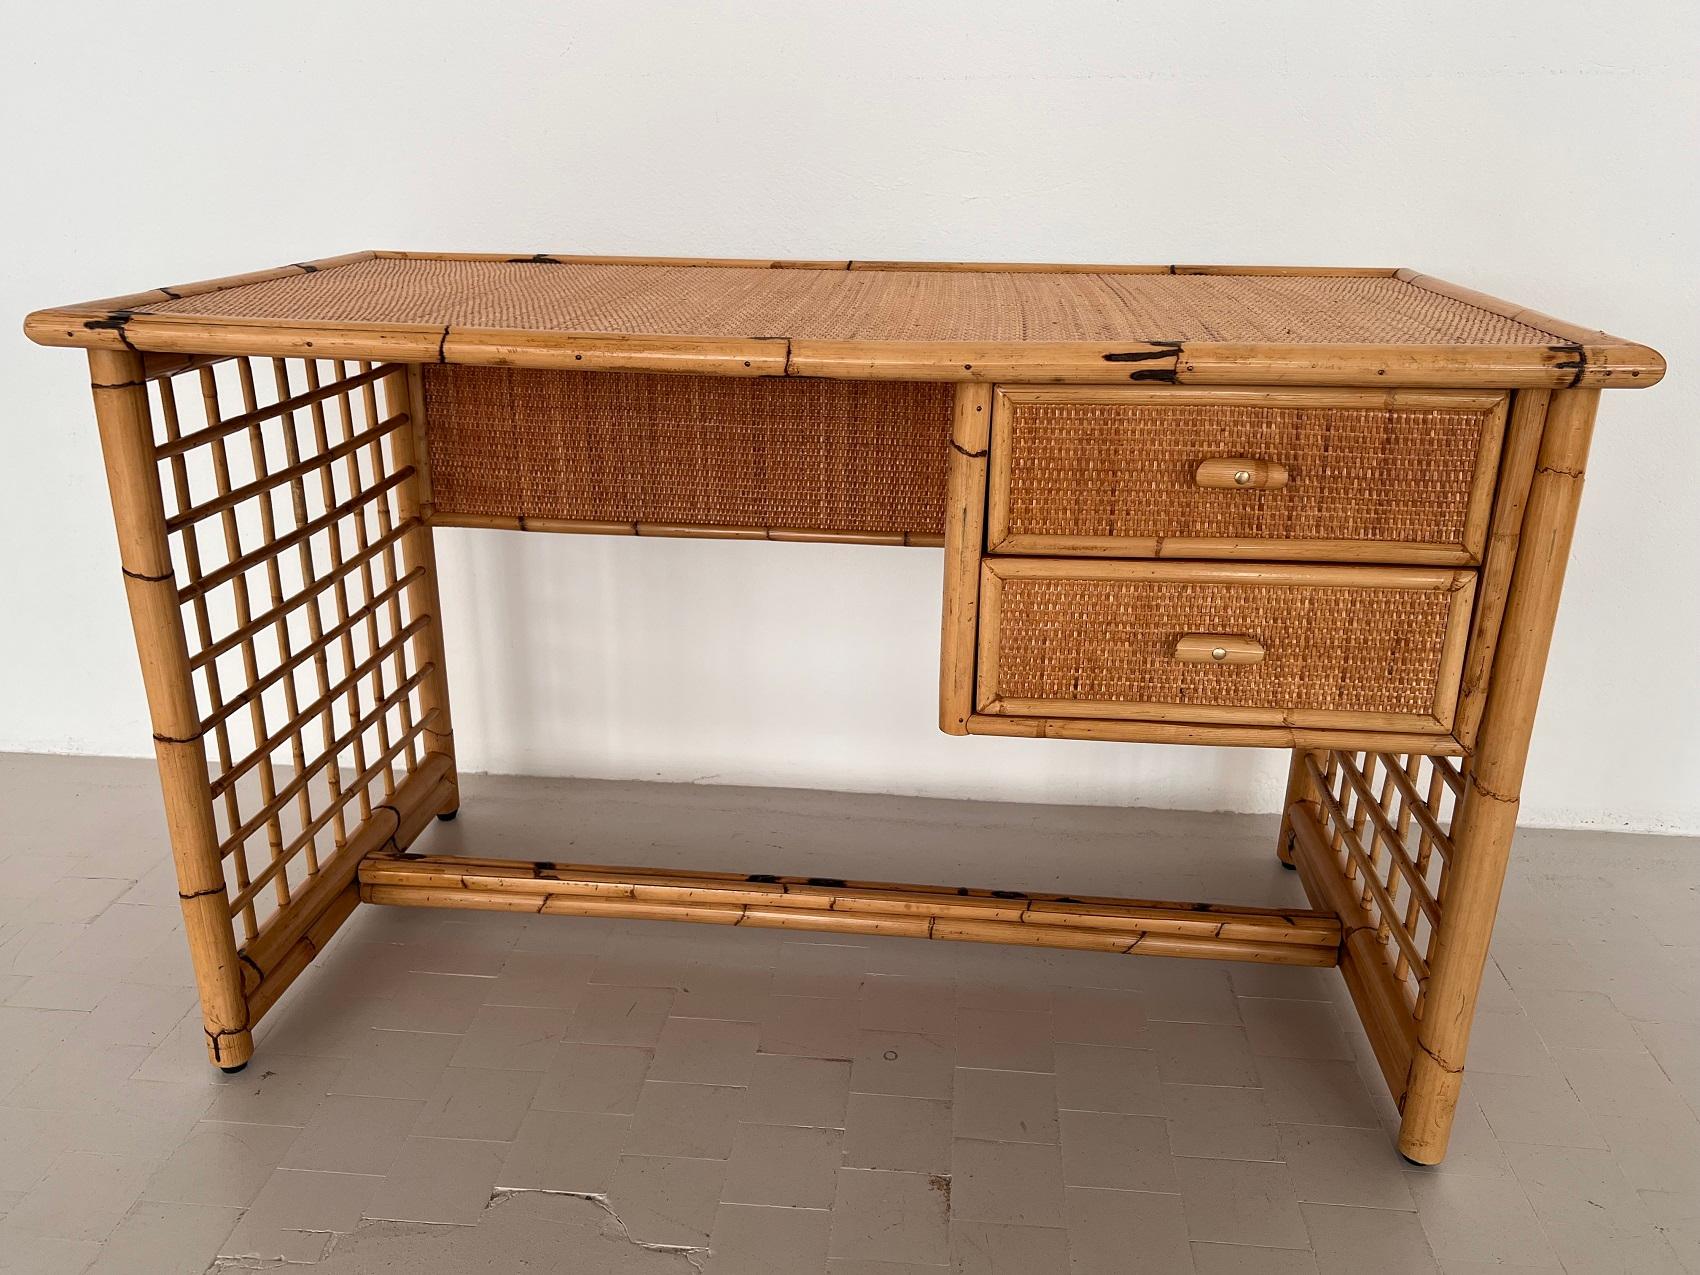 Italian Midcentury Bamboo and Rattan Desk or Vanity with two Drawers, 1970s For Sale 3